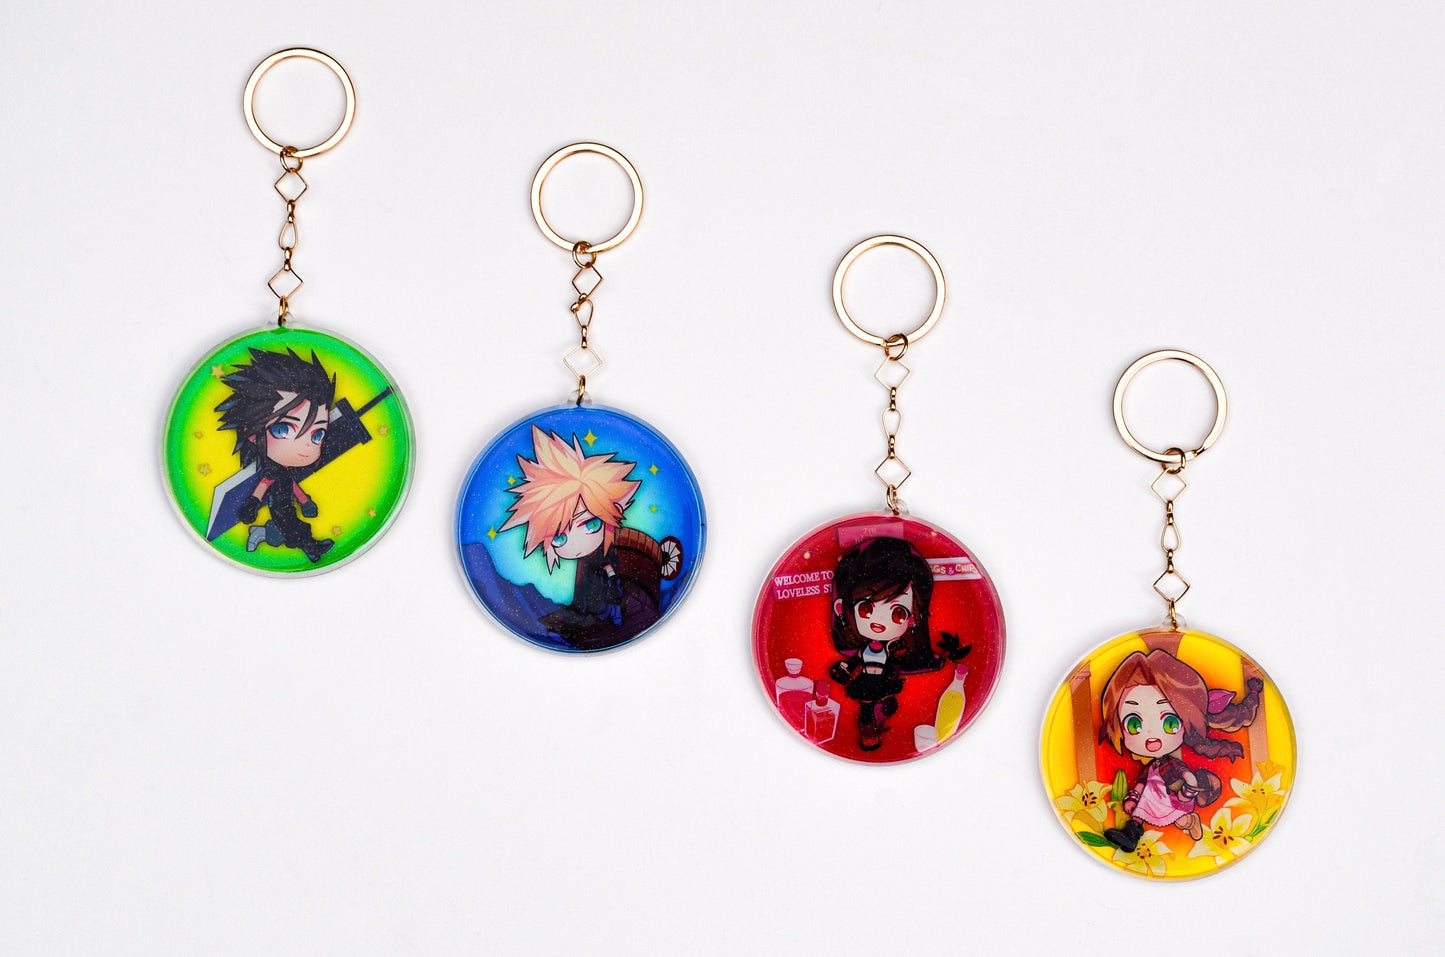 3" Materia Charms